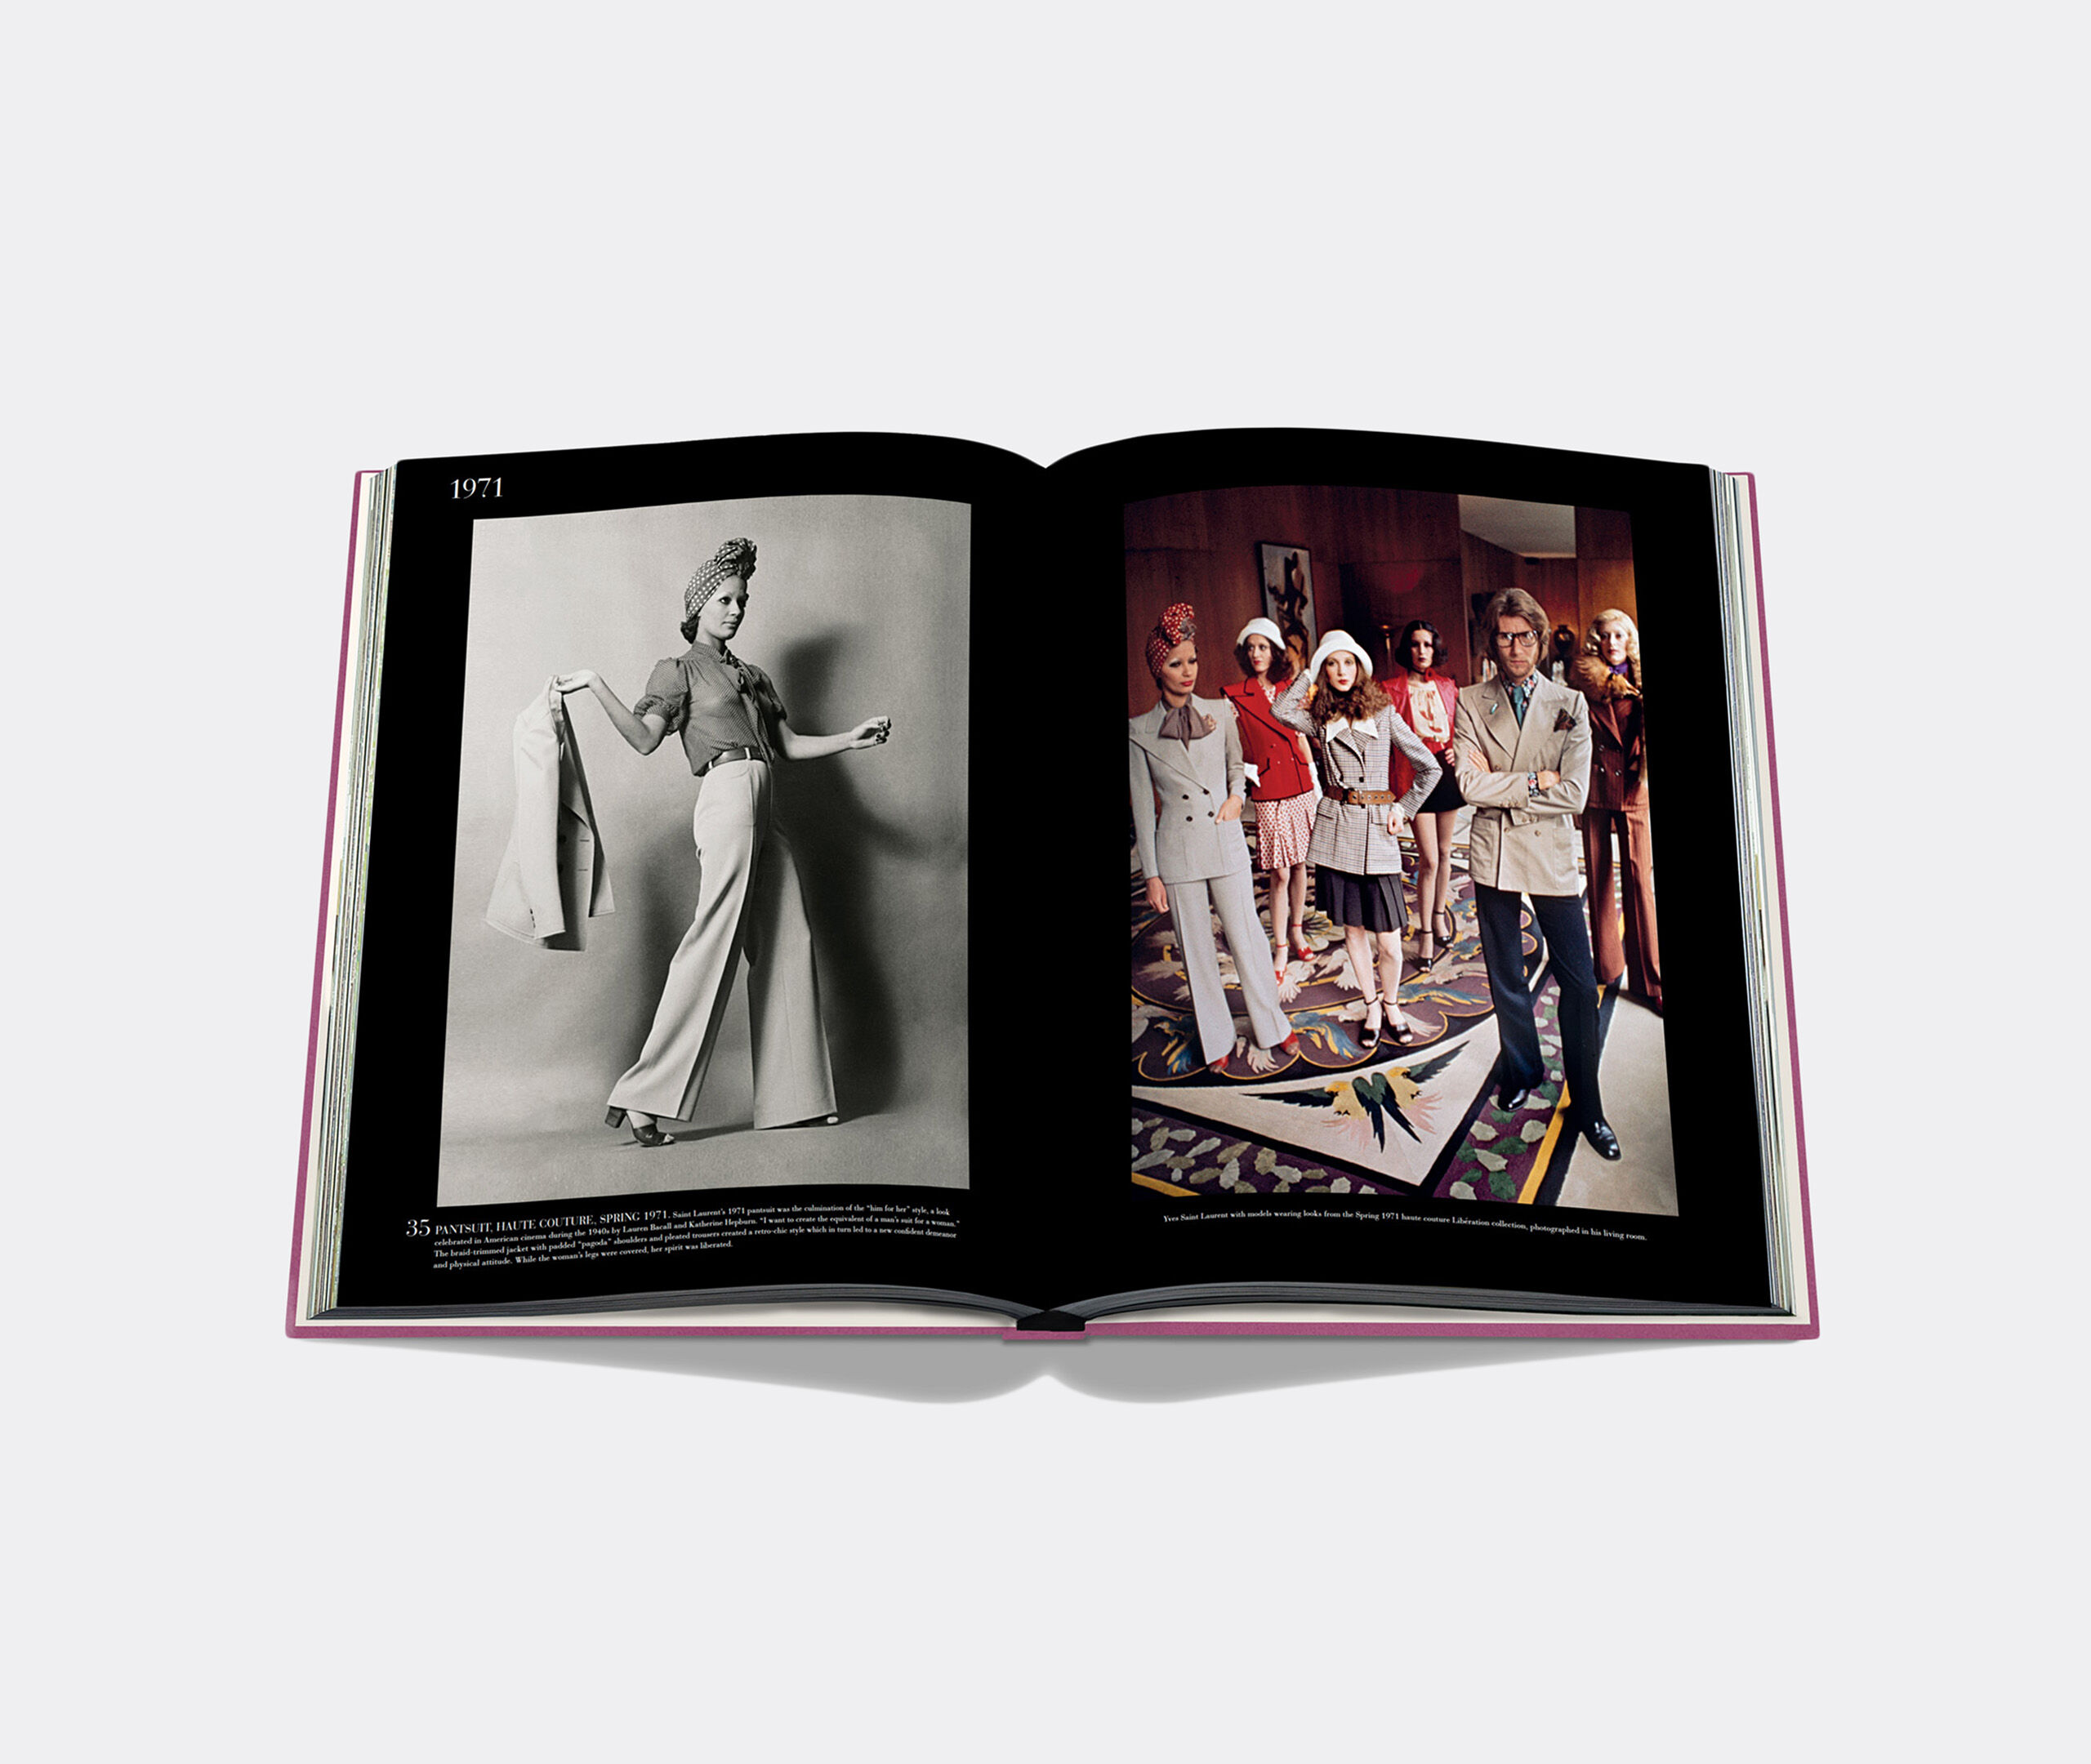 Yves Saint Laurent: The Impossible Collection' by Assouline